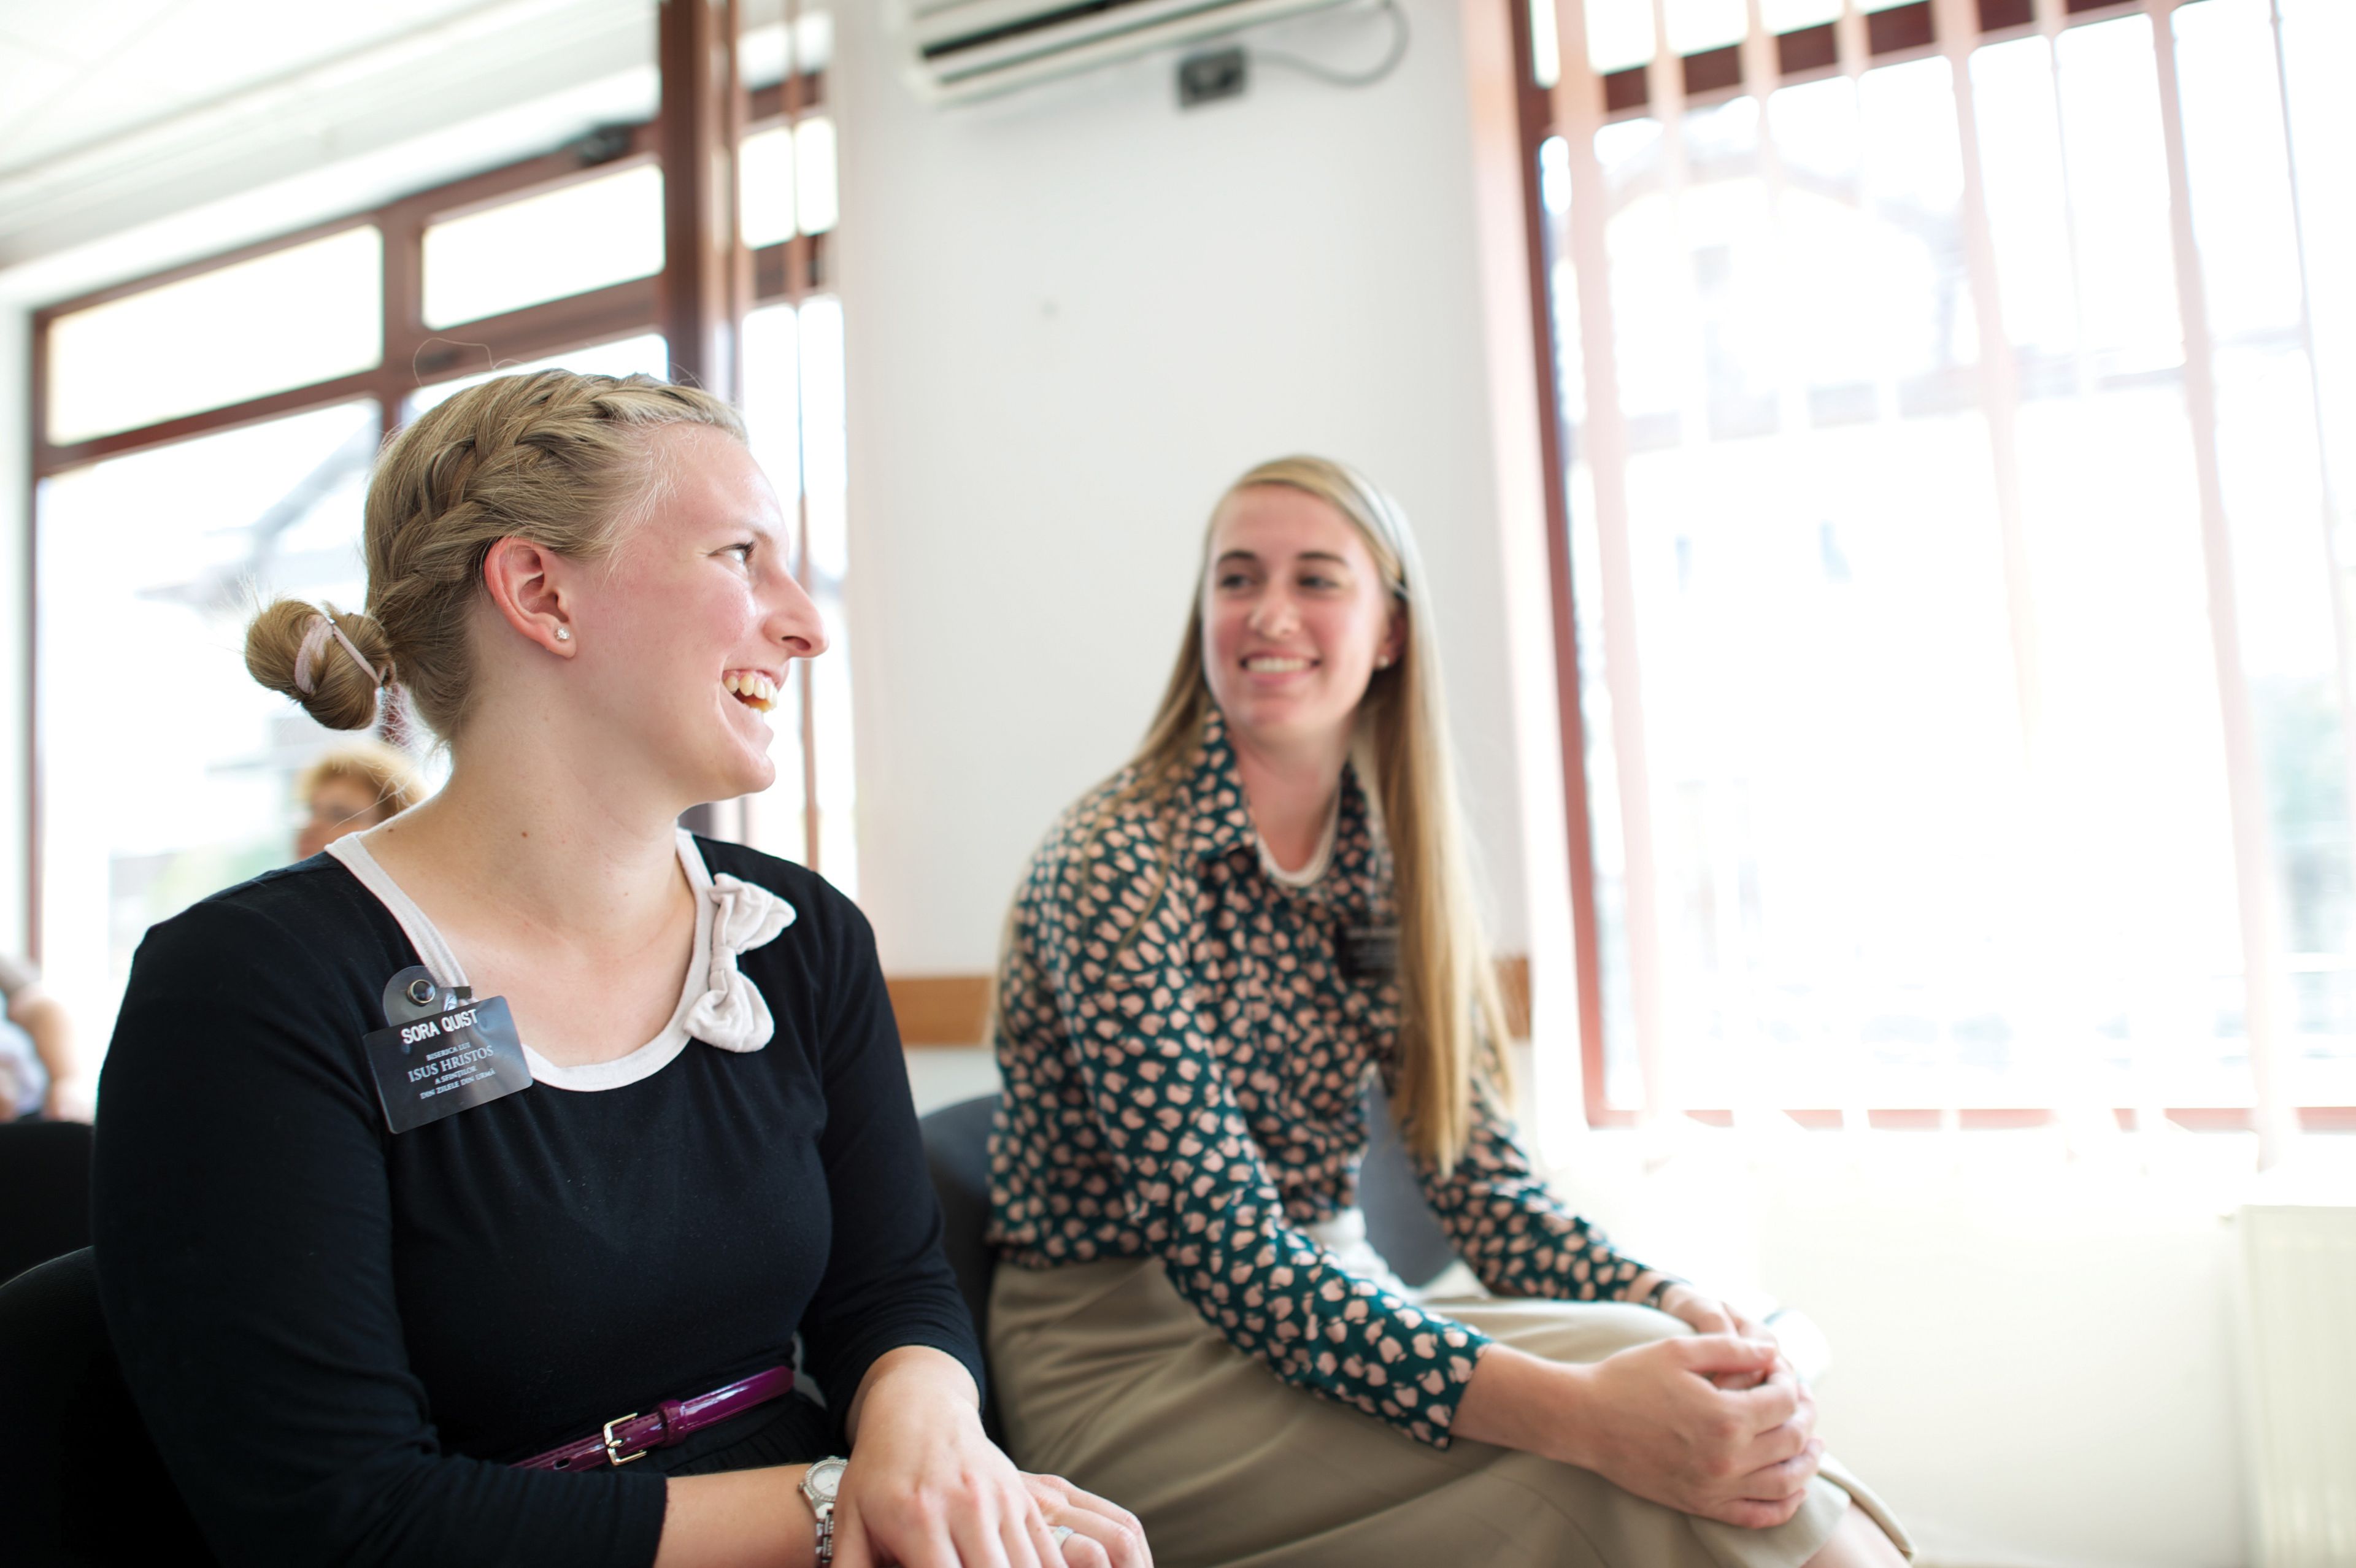 Sister missionaries look at each other and laugh.